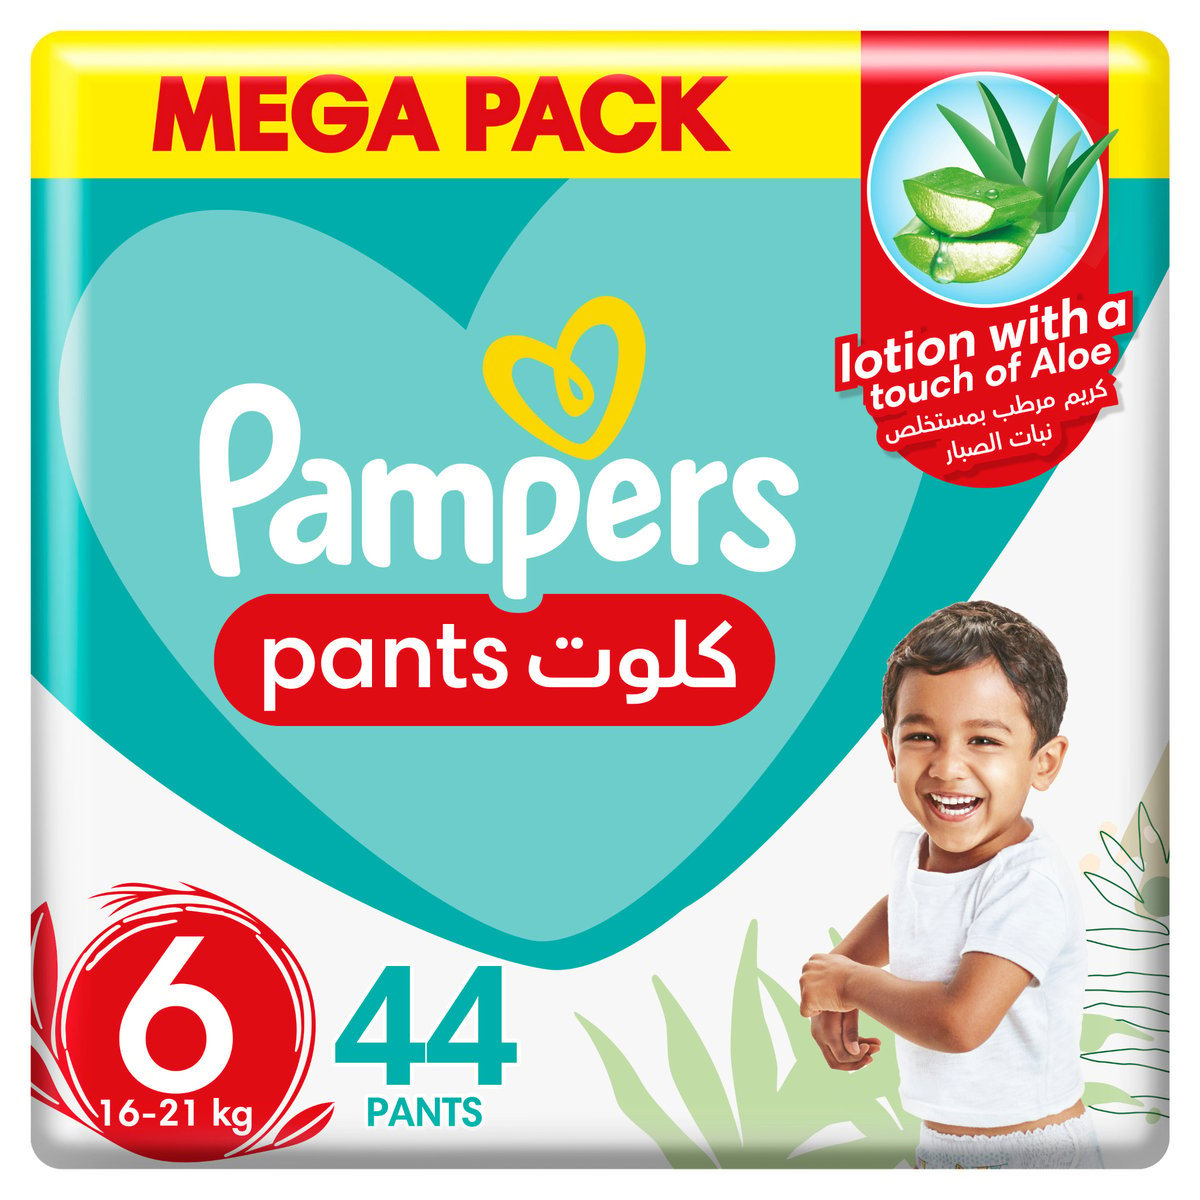 Buy Pampers Baby-Dry Pants Diapers with Aloe Vera Lotion, 360 Fit & up to 100% Leakproof, Size 6, 16-21kg, Mega Pack, 44 pcs Online at Best Price | Baby Nappies | Lulu KSA in Kuwait